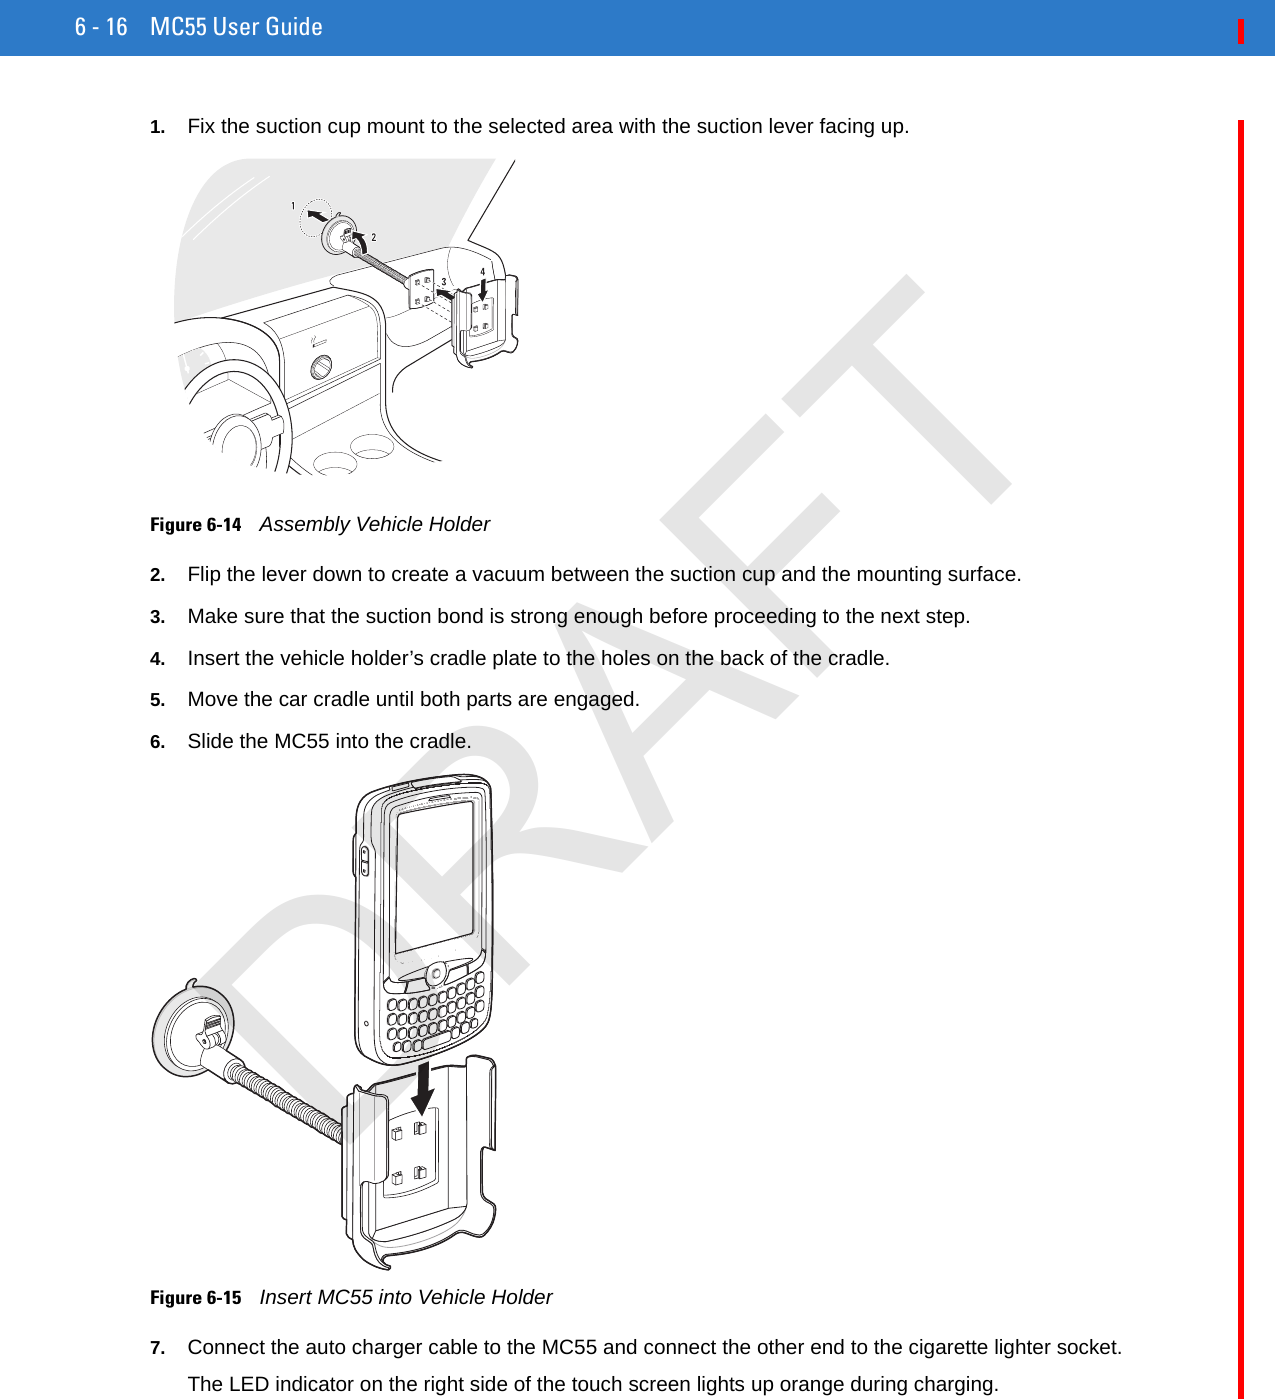 6 - 16 MC55 User Guide1. Fix the suction cup mount to the selected area with the suction lever facing up.Figure 6-14    Assembly Vehicle Holder2. Flip the lever down to create a vacuum between the suction cup and the mounting surface.3. Make sure that the suction bond is strong enough before proceeding to the next step.4. Insert the vehicle holder’s cradle plate to the holes on the back of the cradle.5. Move the car cradle until both parts are engaged.6. Slide the MC55 into the cradle.Figure 6-15    Insert MC55 into Vehicle Holder7. Connect the auto charger cable to the MC55 and connect the other end to the cigarette lighter socket.The LED indicator on the right side of the touch screen lights up orange during charging.DRAFT